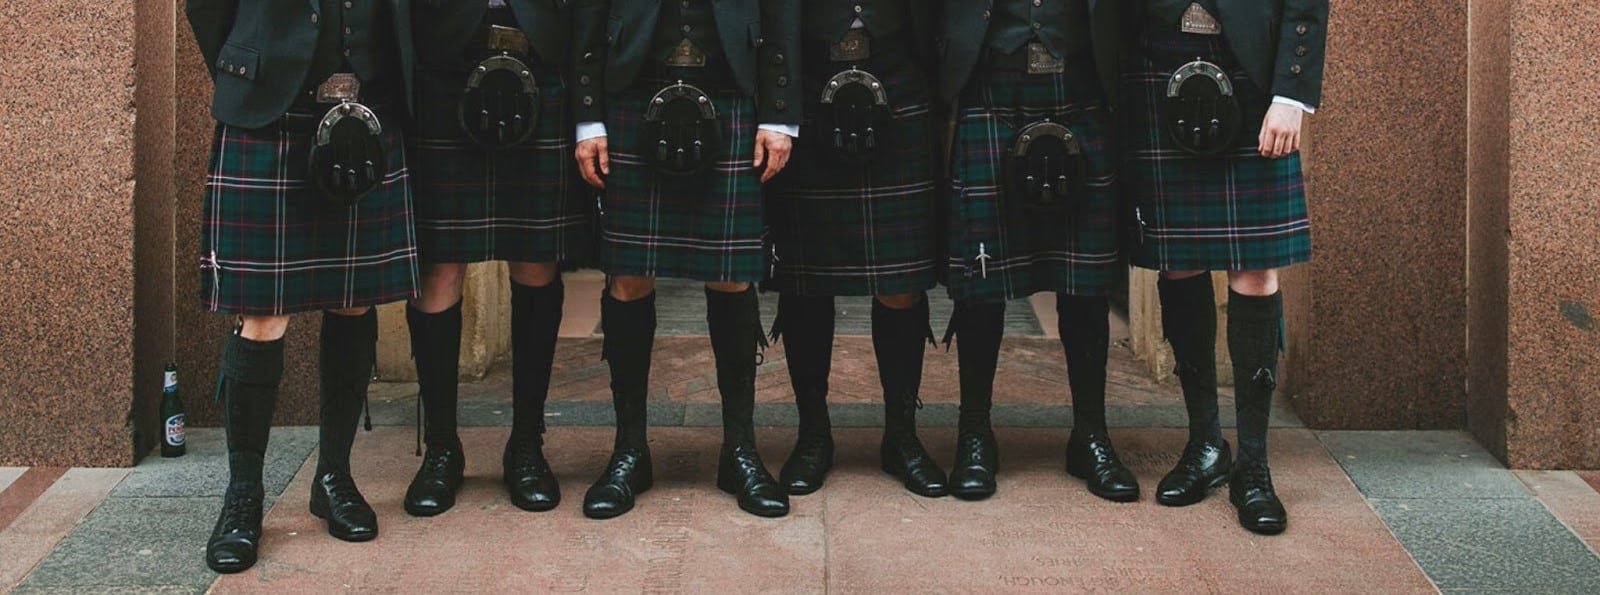 The Essential Guide to Choosing and Wearing a Kilt Pin